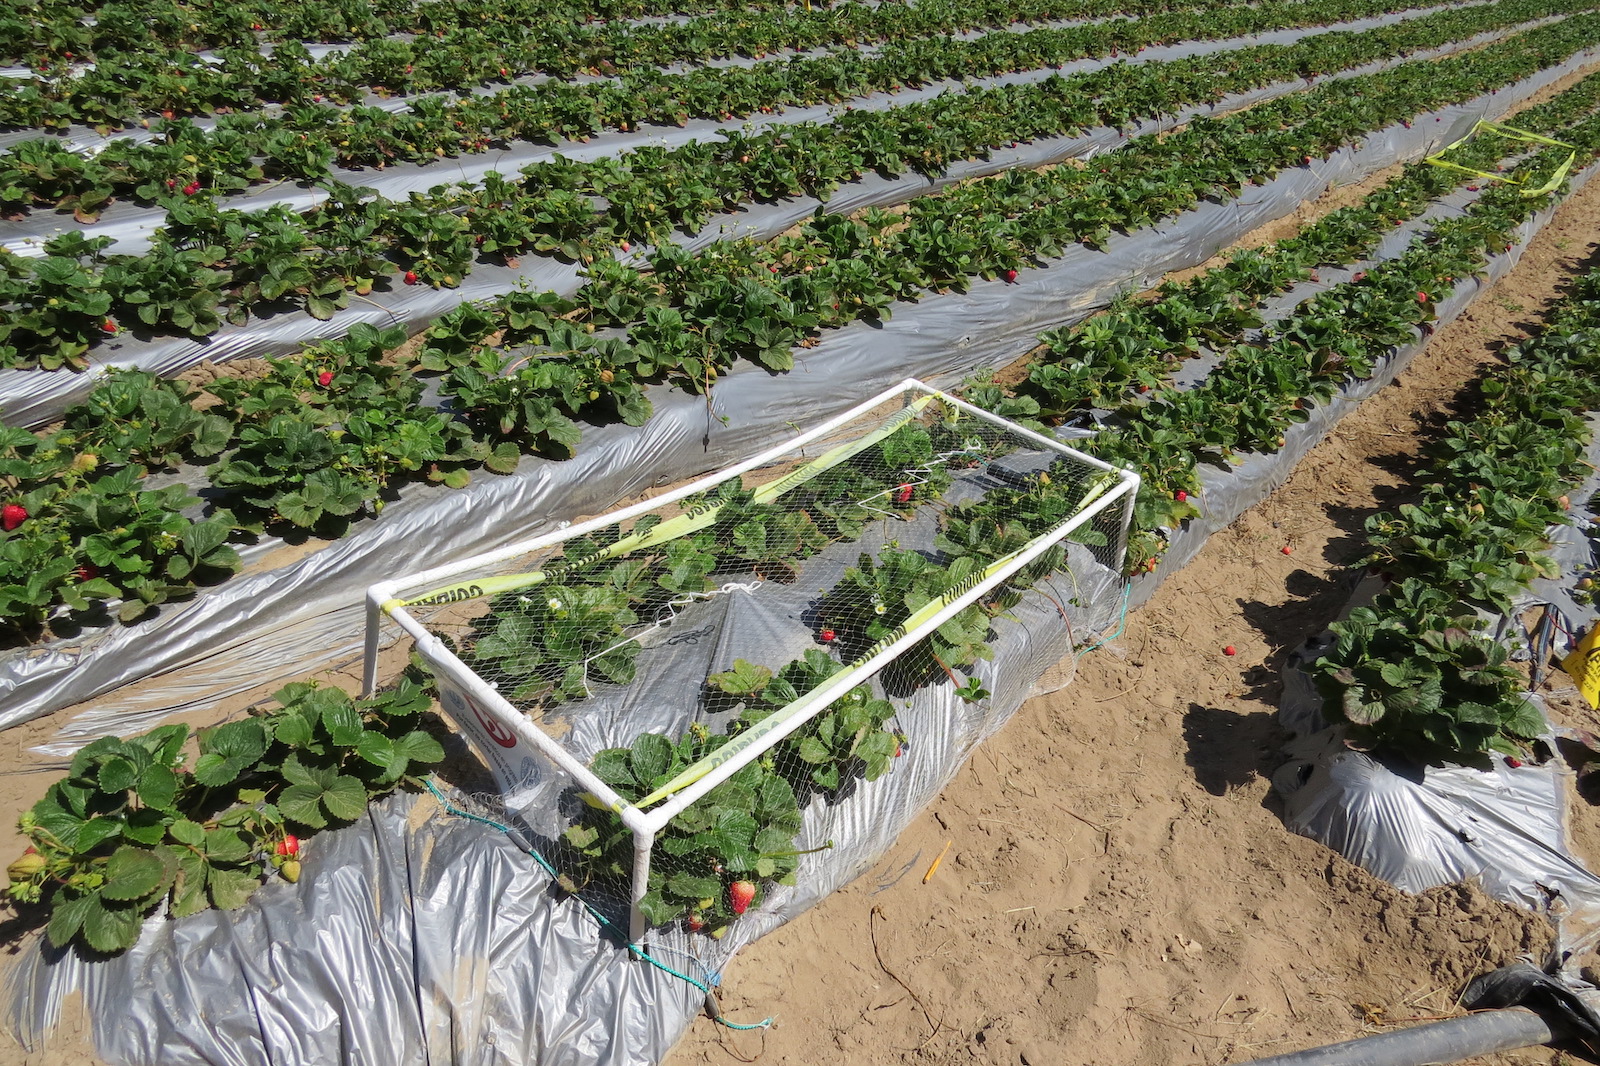 Cages in a strawberry field as part of an experiment